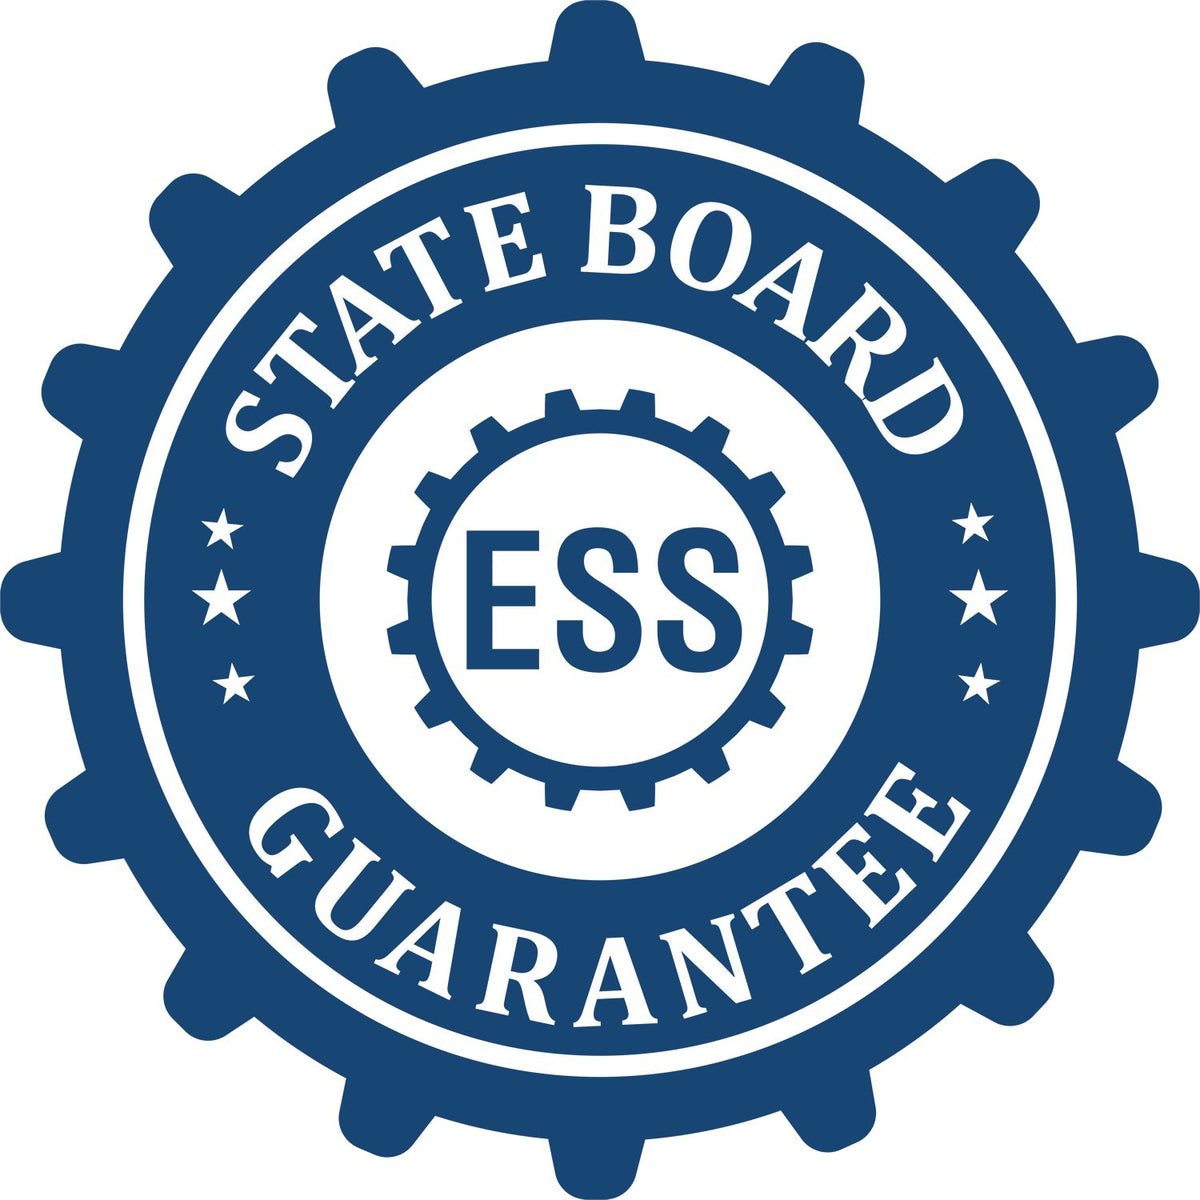 An emblem in a gear shape illustrating a state board guarantee for the North Dakota Engineer Desk Seal product.